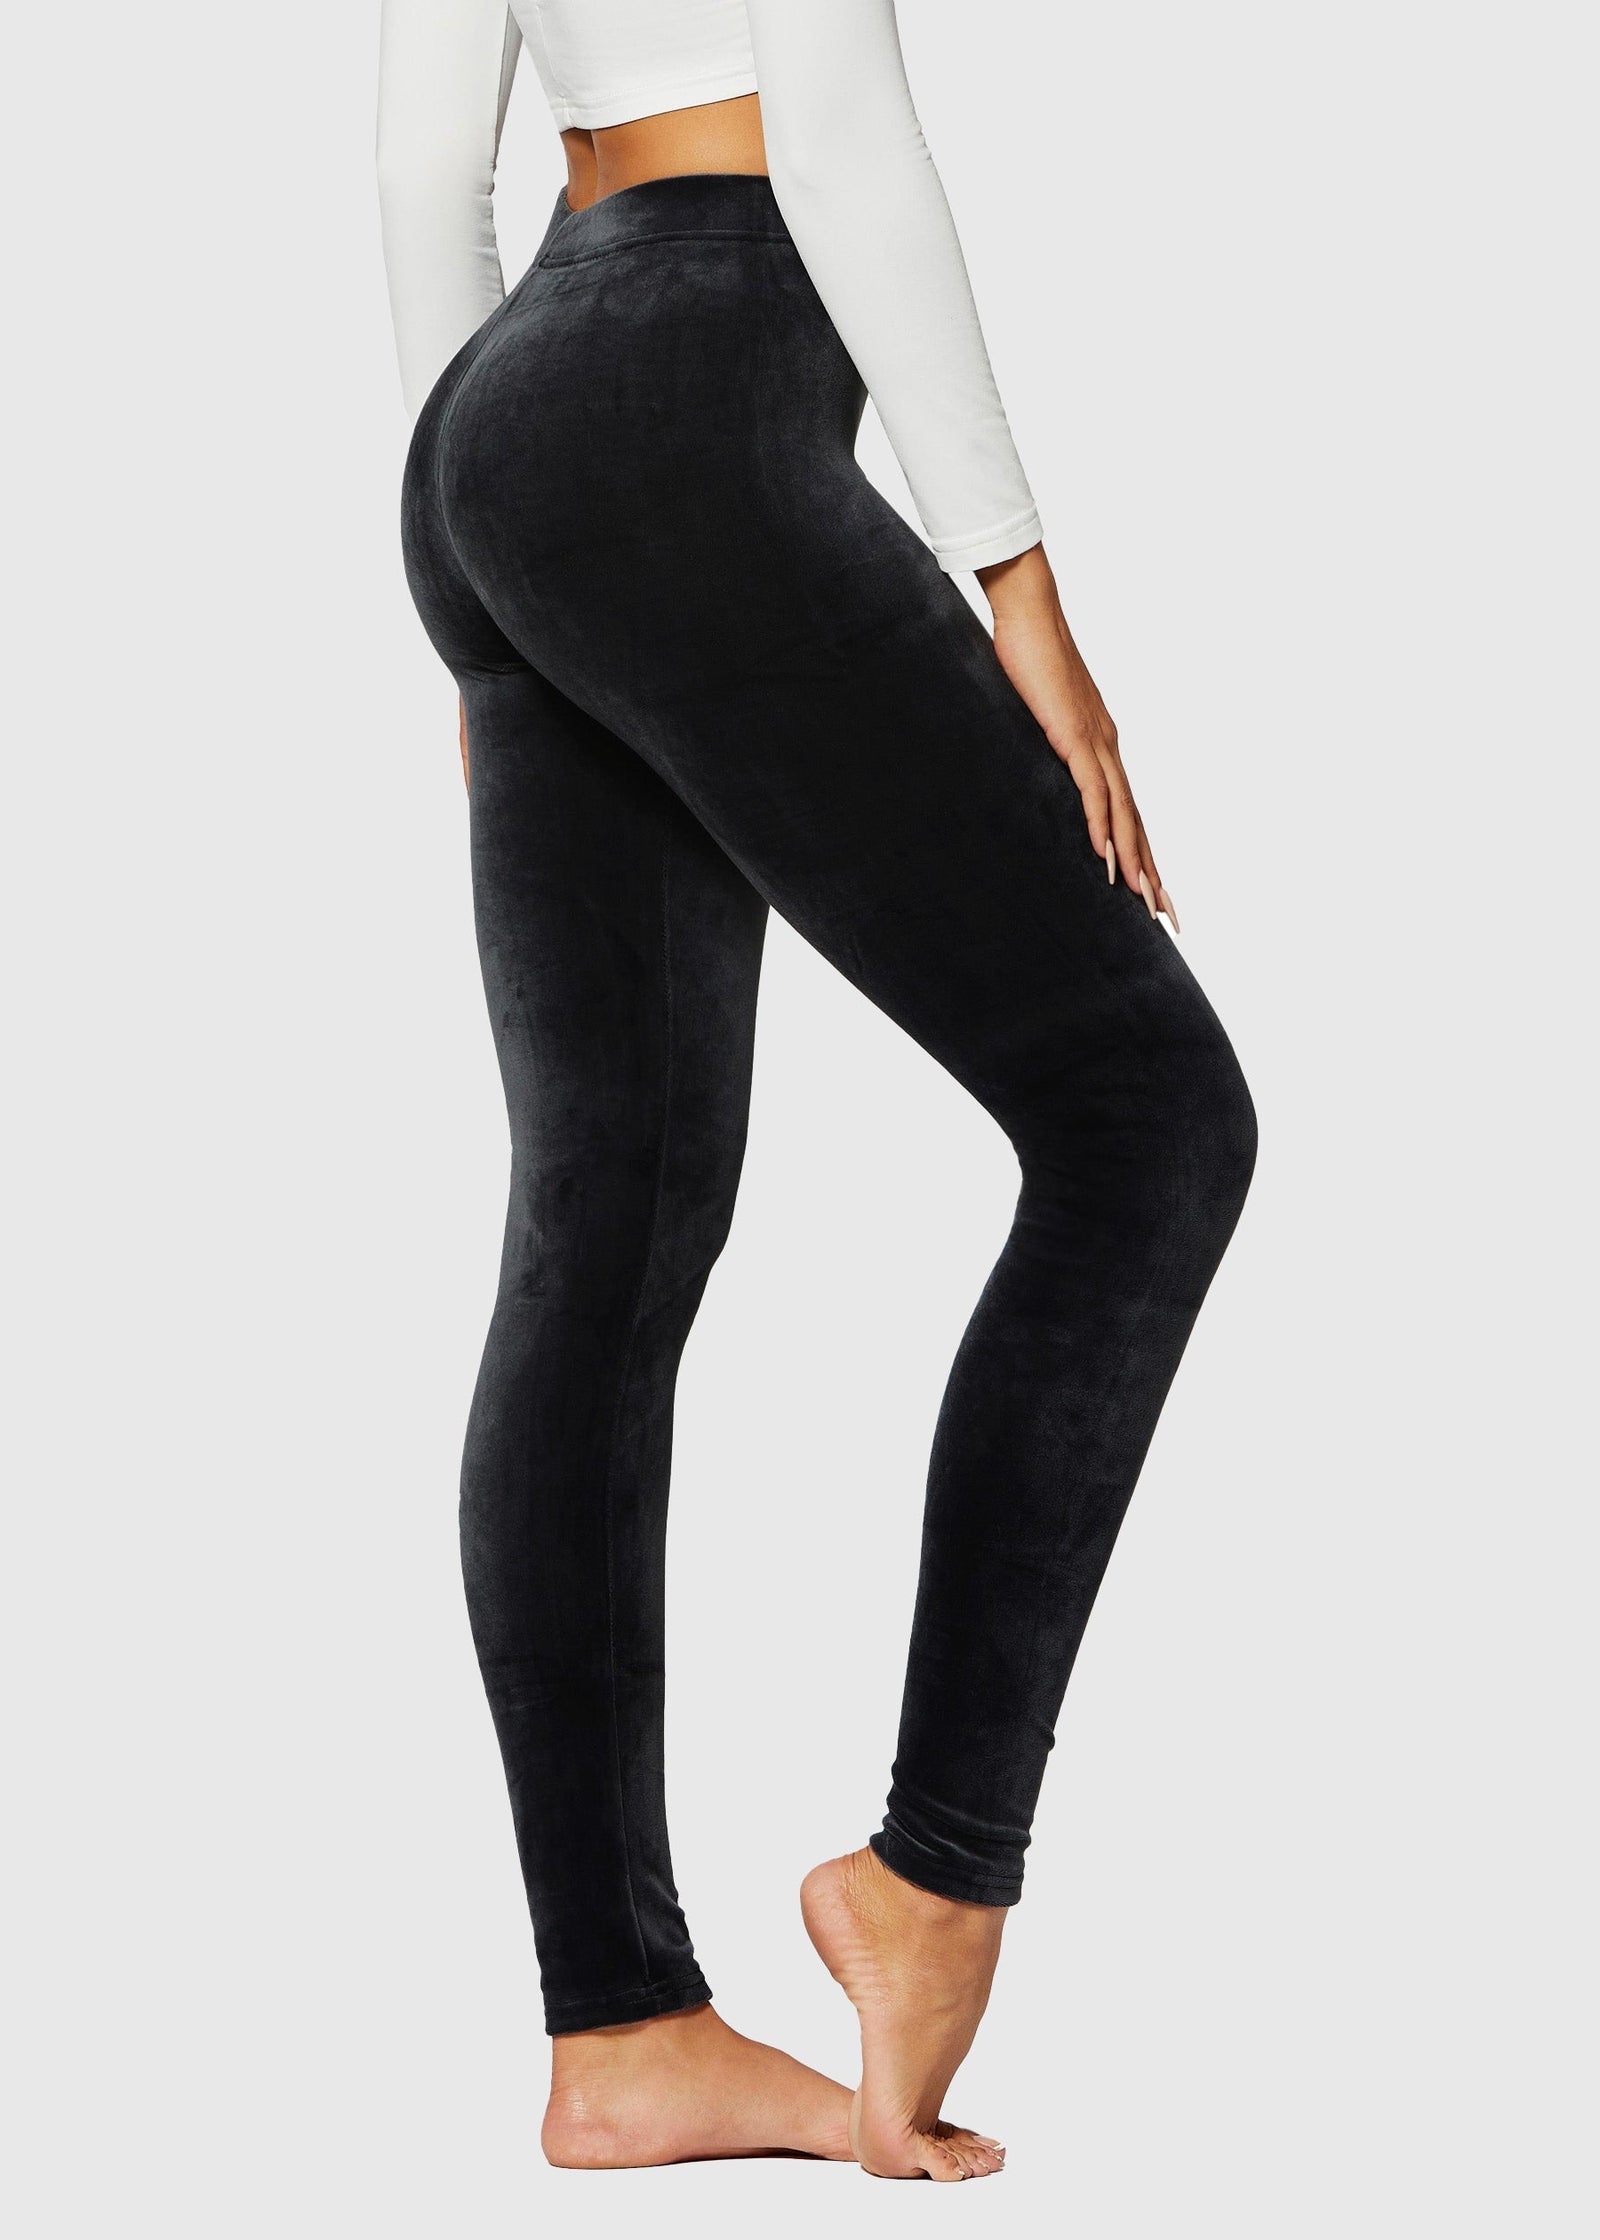 JOYO Conceited Leggings for Women Fleece Women's Tights Compression Pants  Yoga Running Fitness High Waist Leggings Black : : Clothing, Shoes  & Accessories